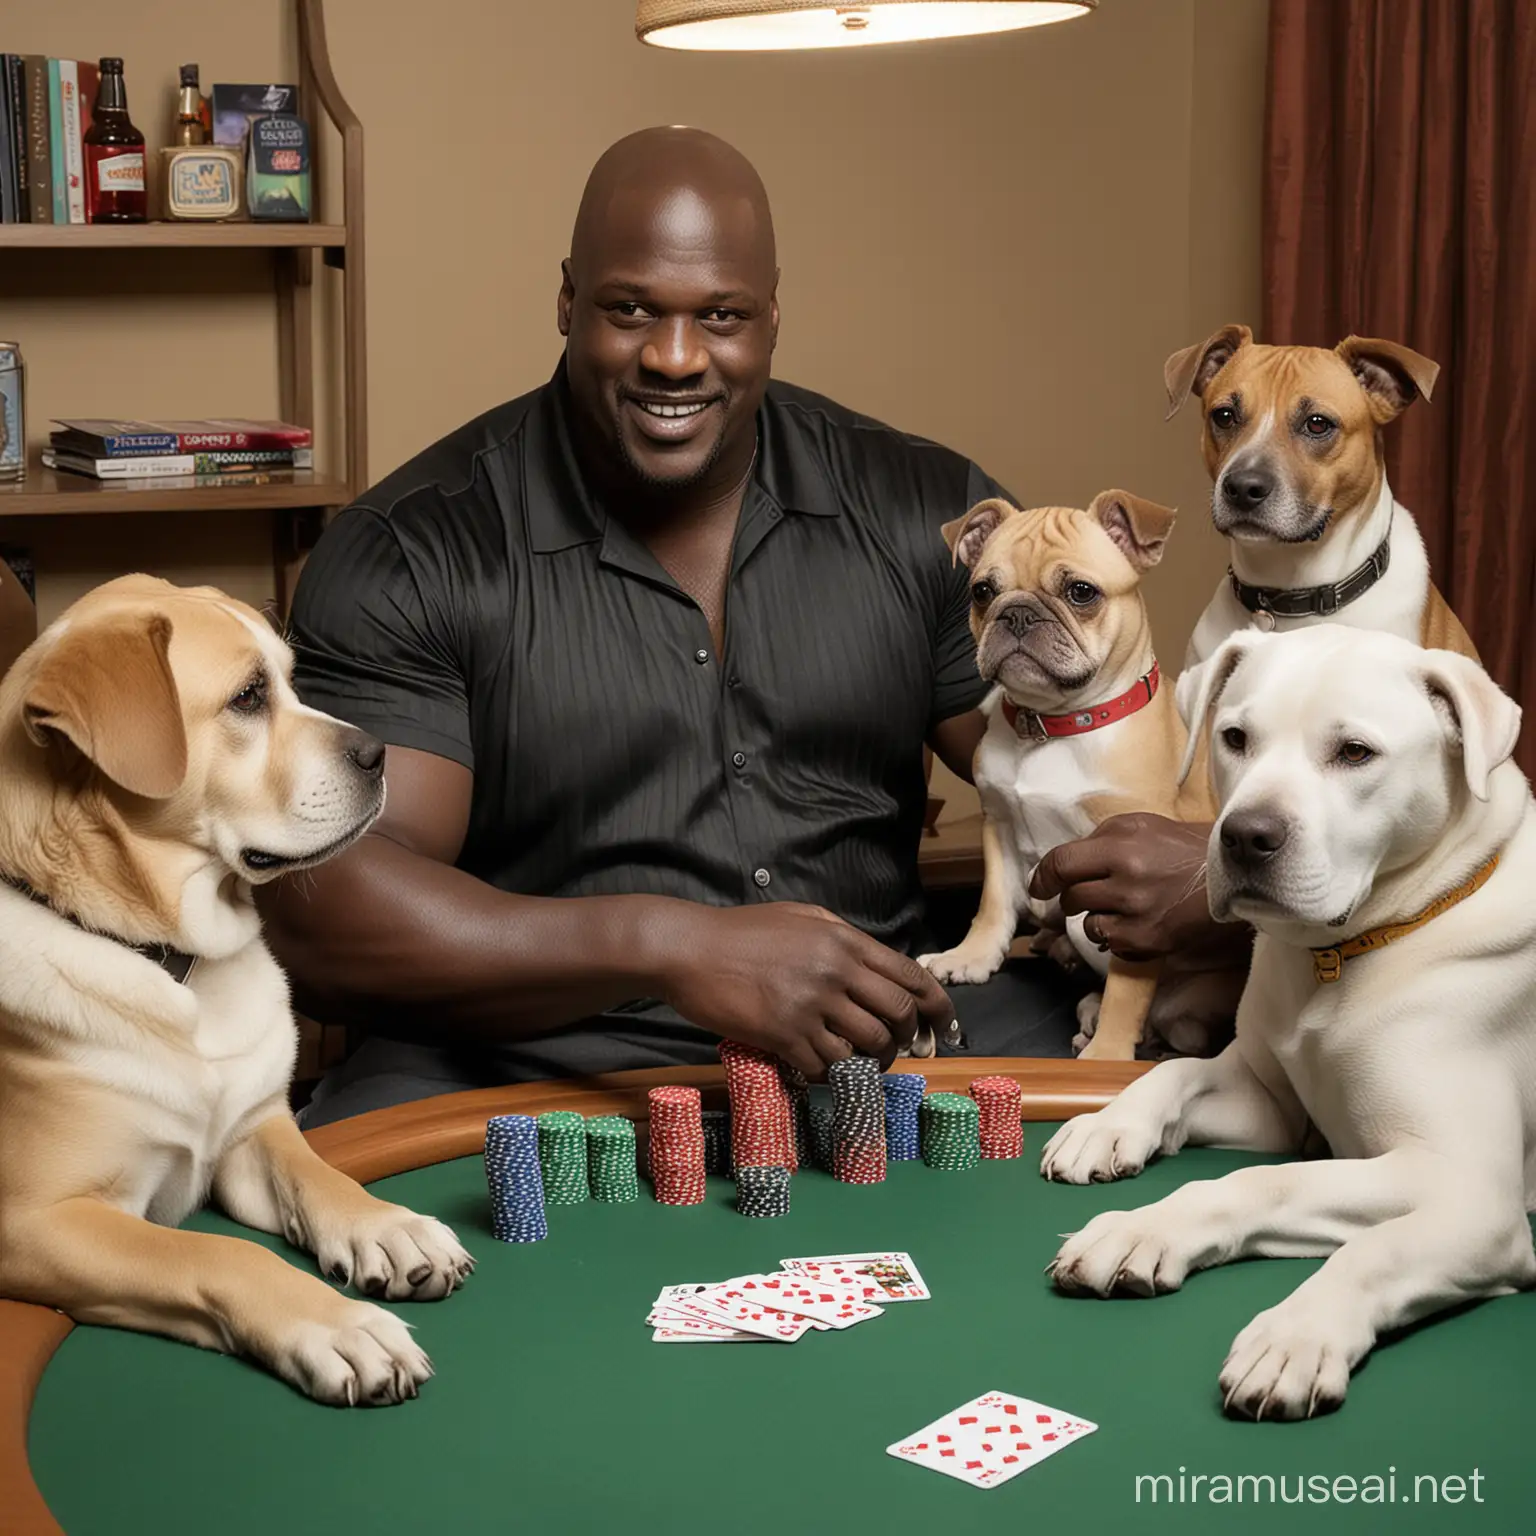 Basketball Legend Shaquille ONeal Enjoying a Game of Poker with Adorable Canines